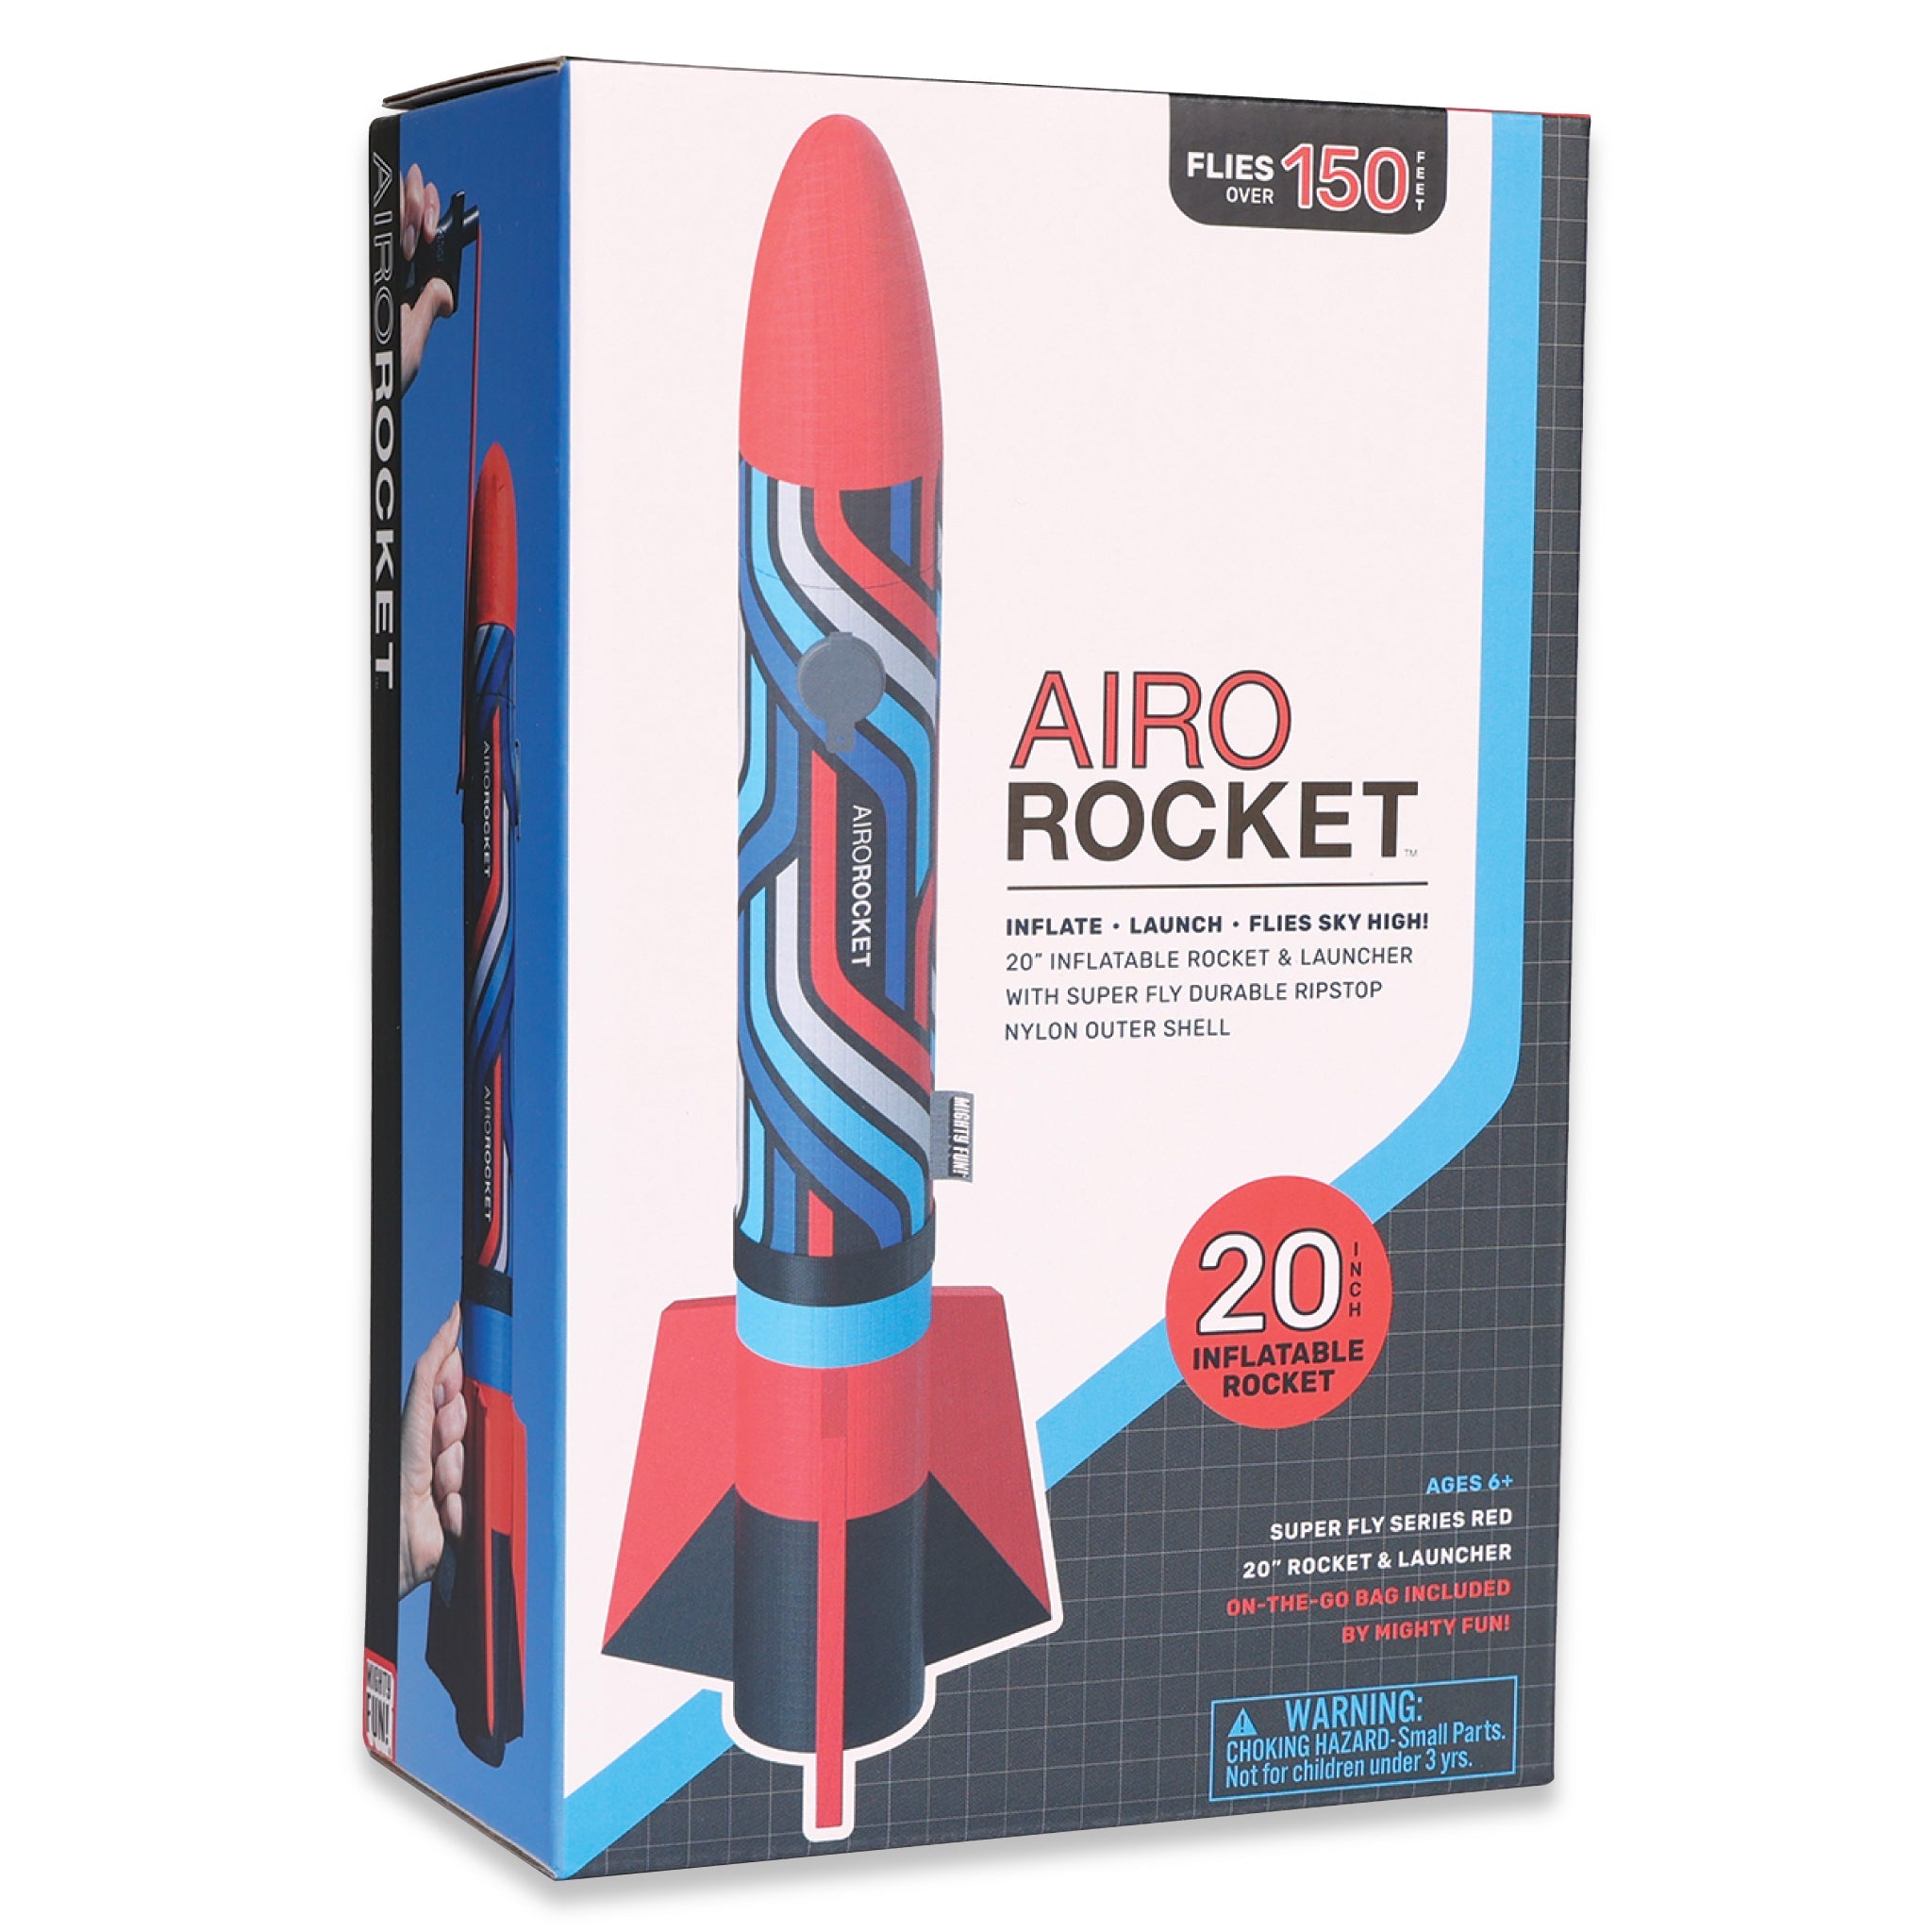 Red Airo Rocket toy rocket kids gift box by Mighty Fun!